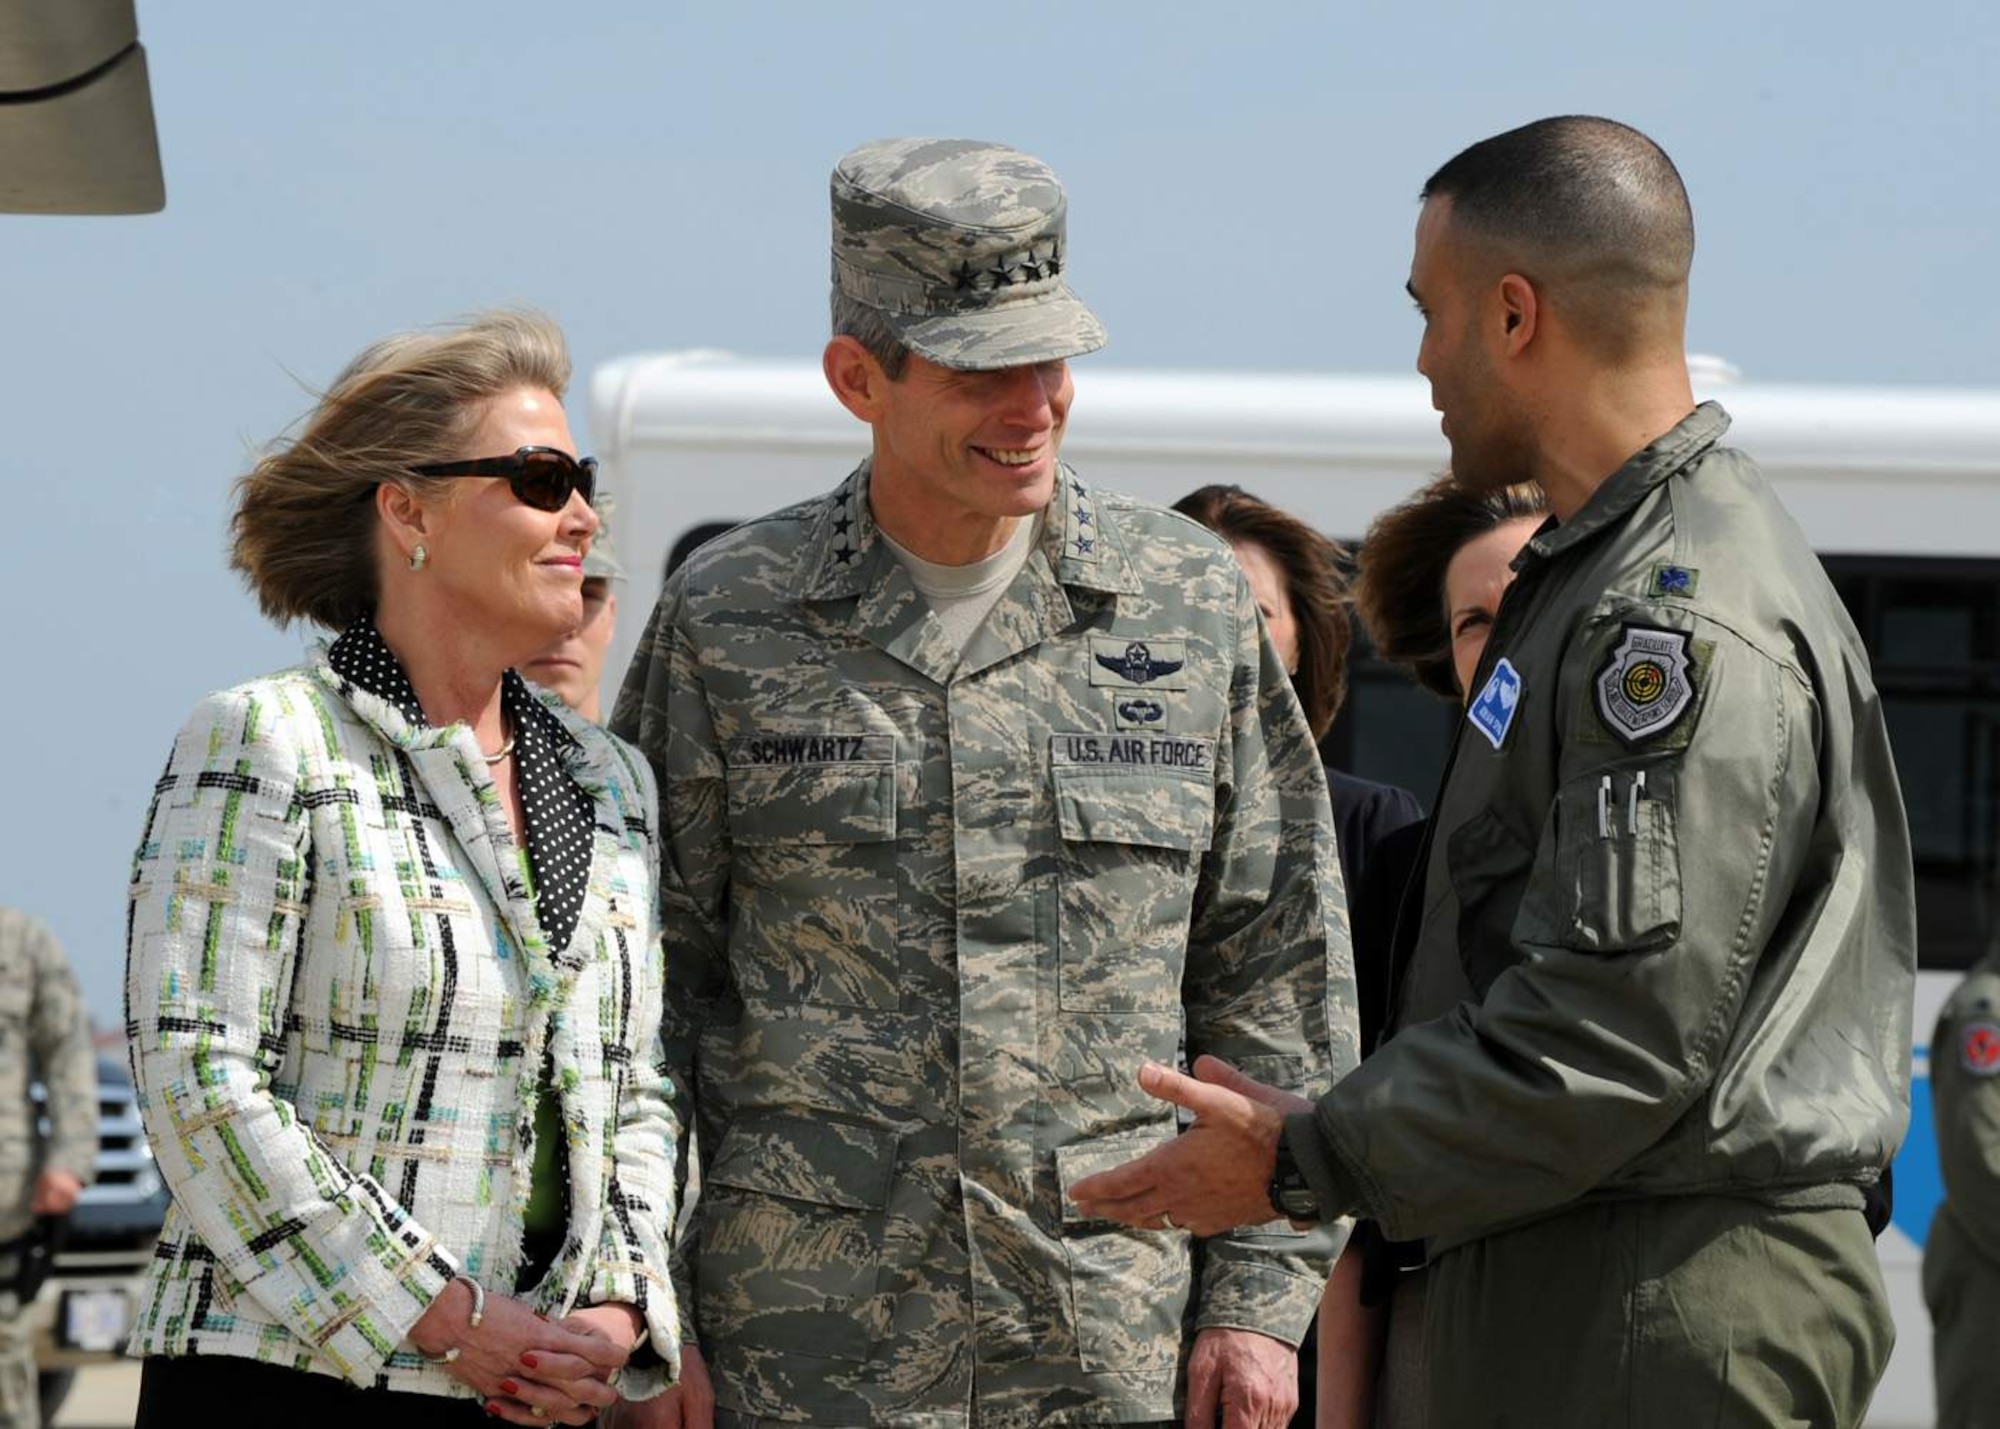 General Norton Schwartz and his wife, Suzie Schwartz, are briefed by Lt. Col. Adrian Spain on the capabilities of the F-22 Raptor March 11 at Langley Air Force Base, Va. General Schwartz, the Air Force chief of staff, reviewed Langley AFB's warfighting capabilities, viewed an F-22 demonstration, and held a town hall meeting with Airmen. Mrs. Schwartz visited the Airmen and Family Readiness Center. Colonel Spain is the 94th Fighter Squadron commander. (U.S. Air Force photo/Airman 1st Class Jonathan Koob) 
